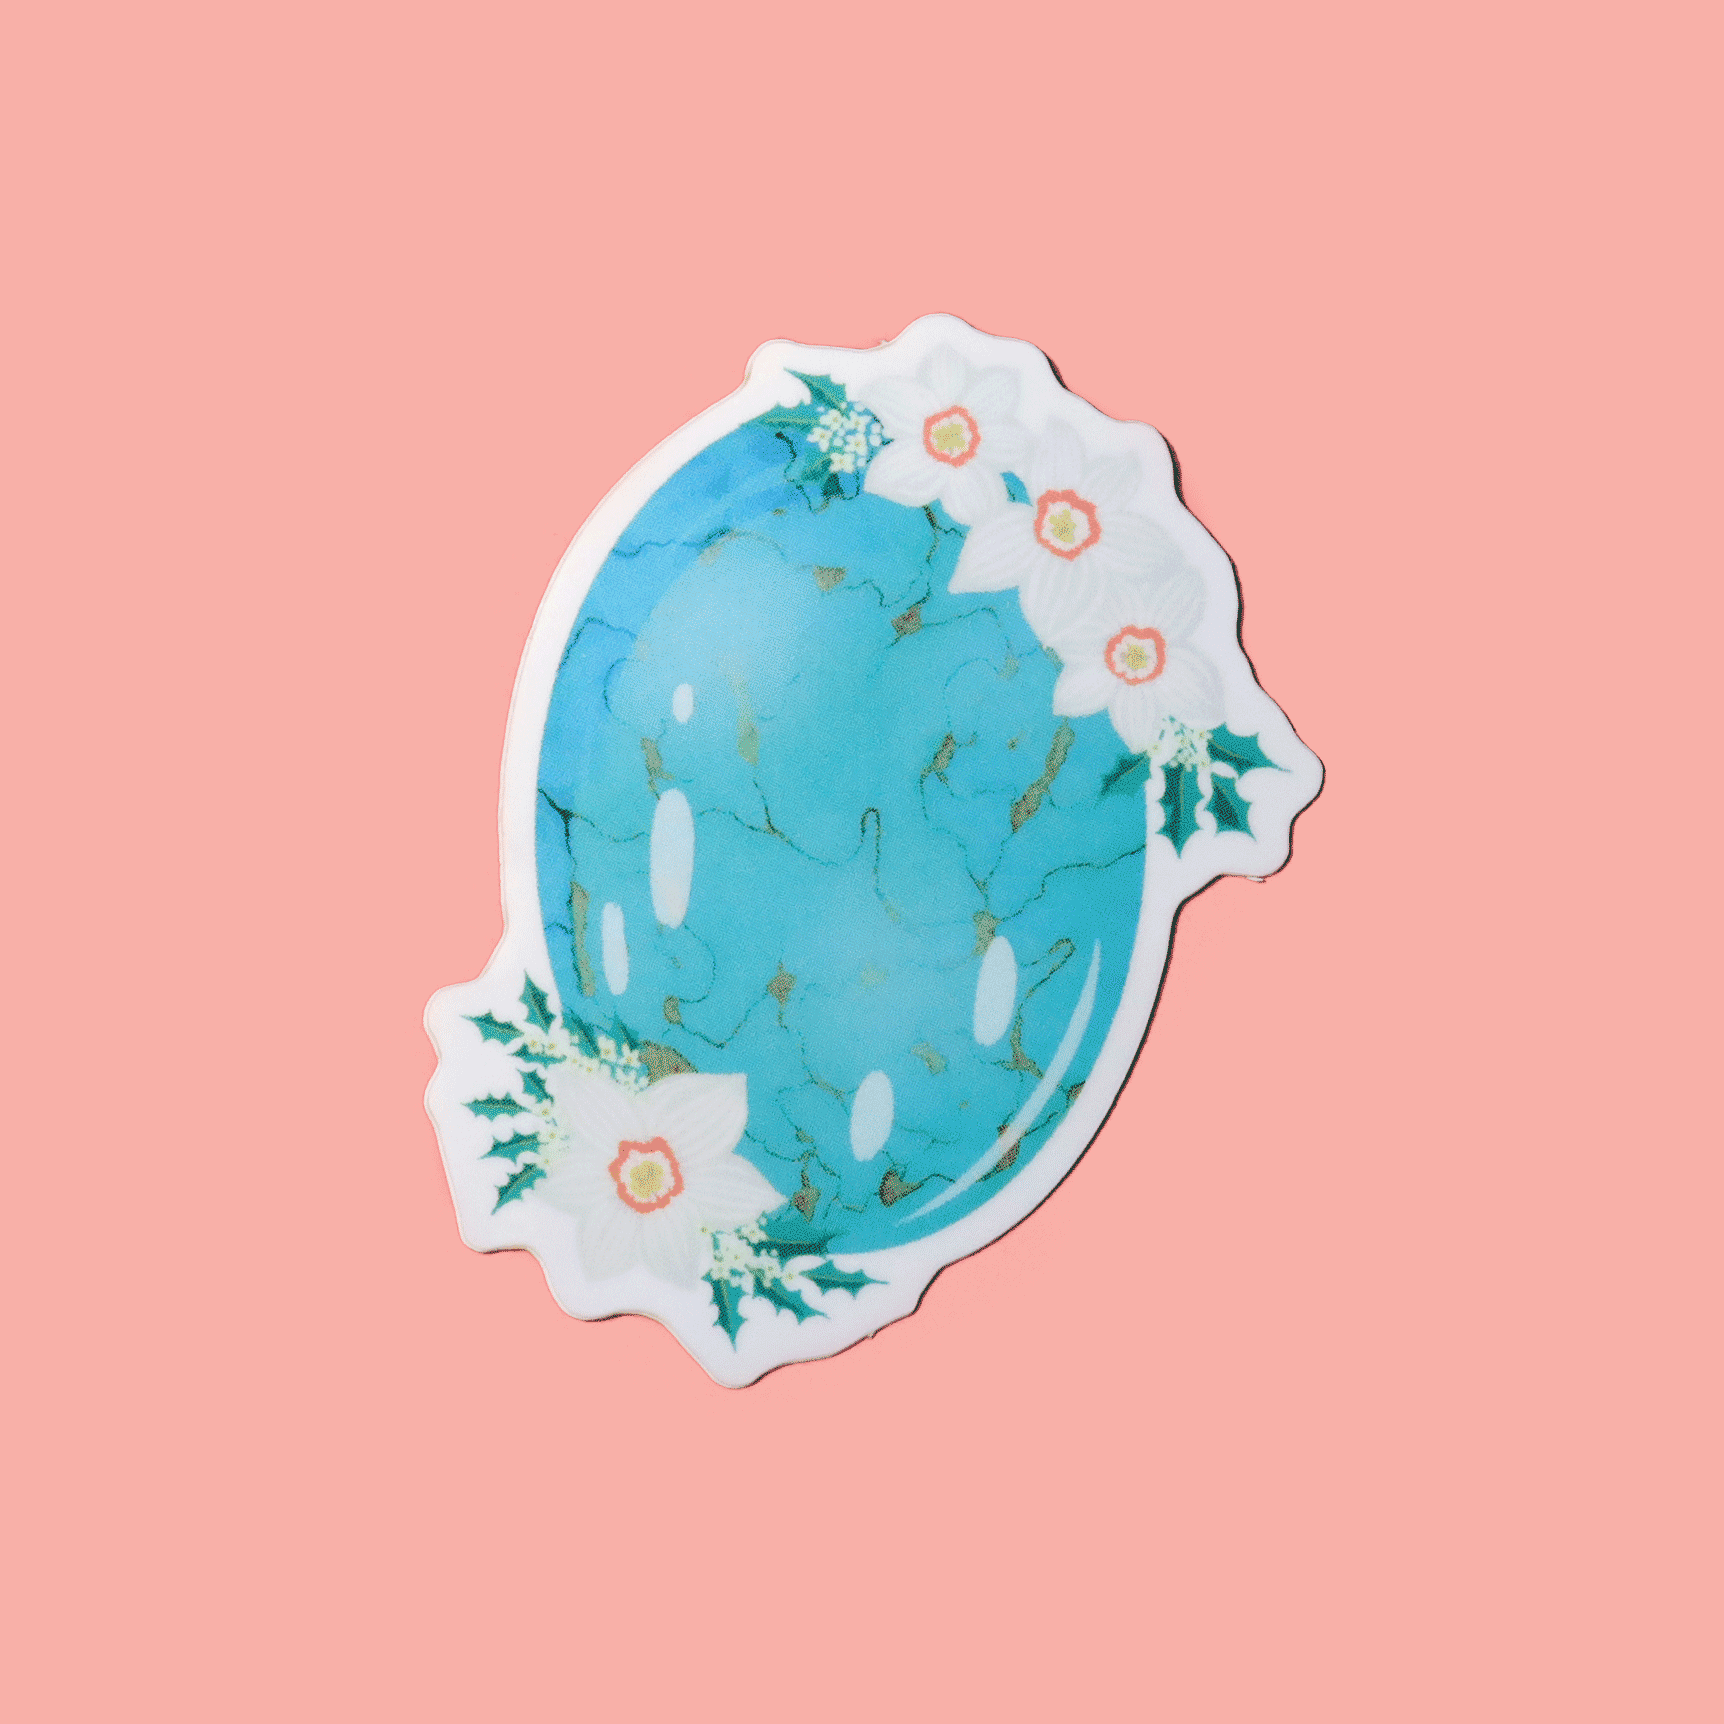 Sticker showcasing an illustrated December birthstone of turquoise and birth flowers of holly and narcissus.